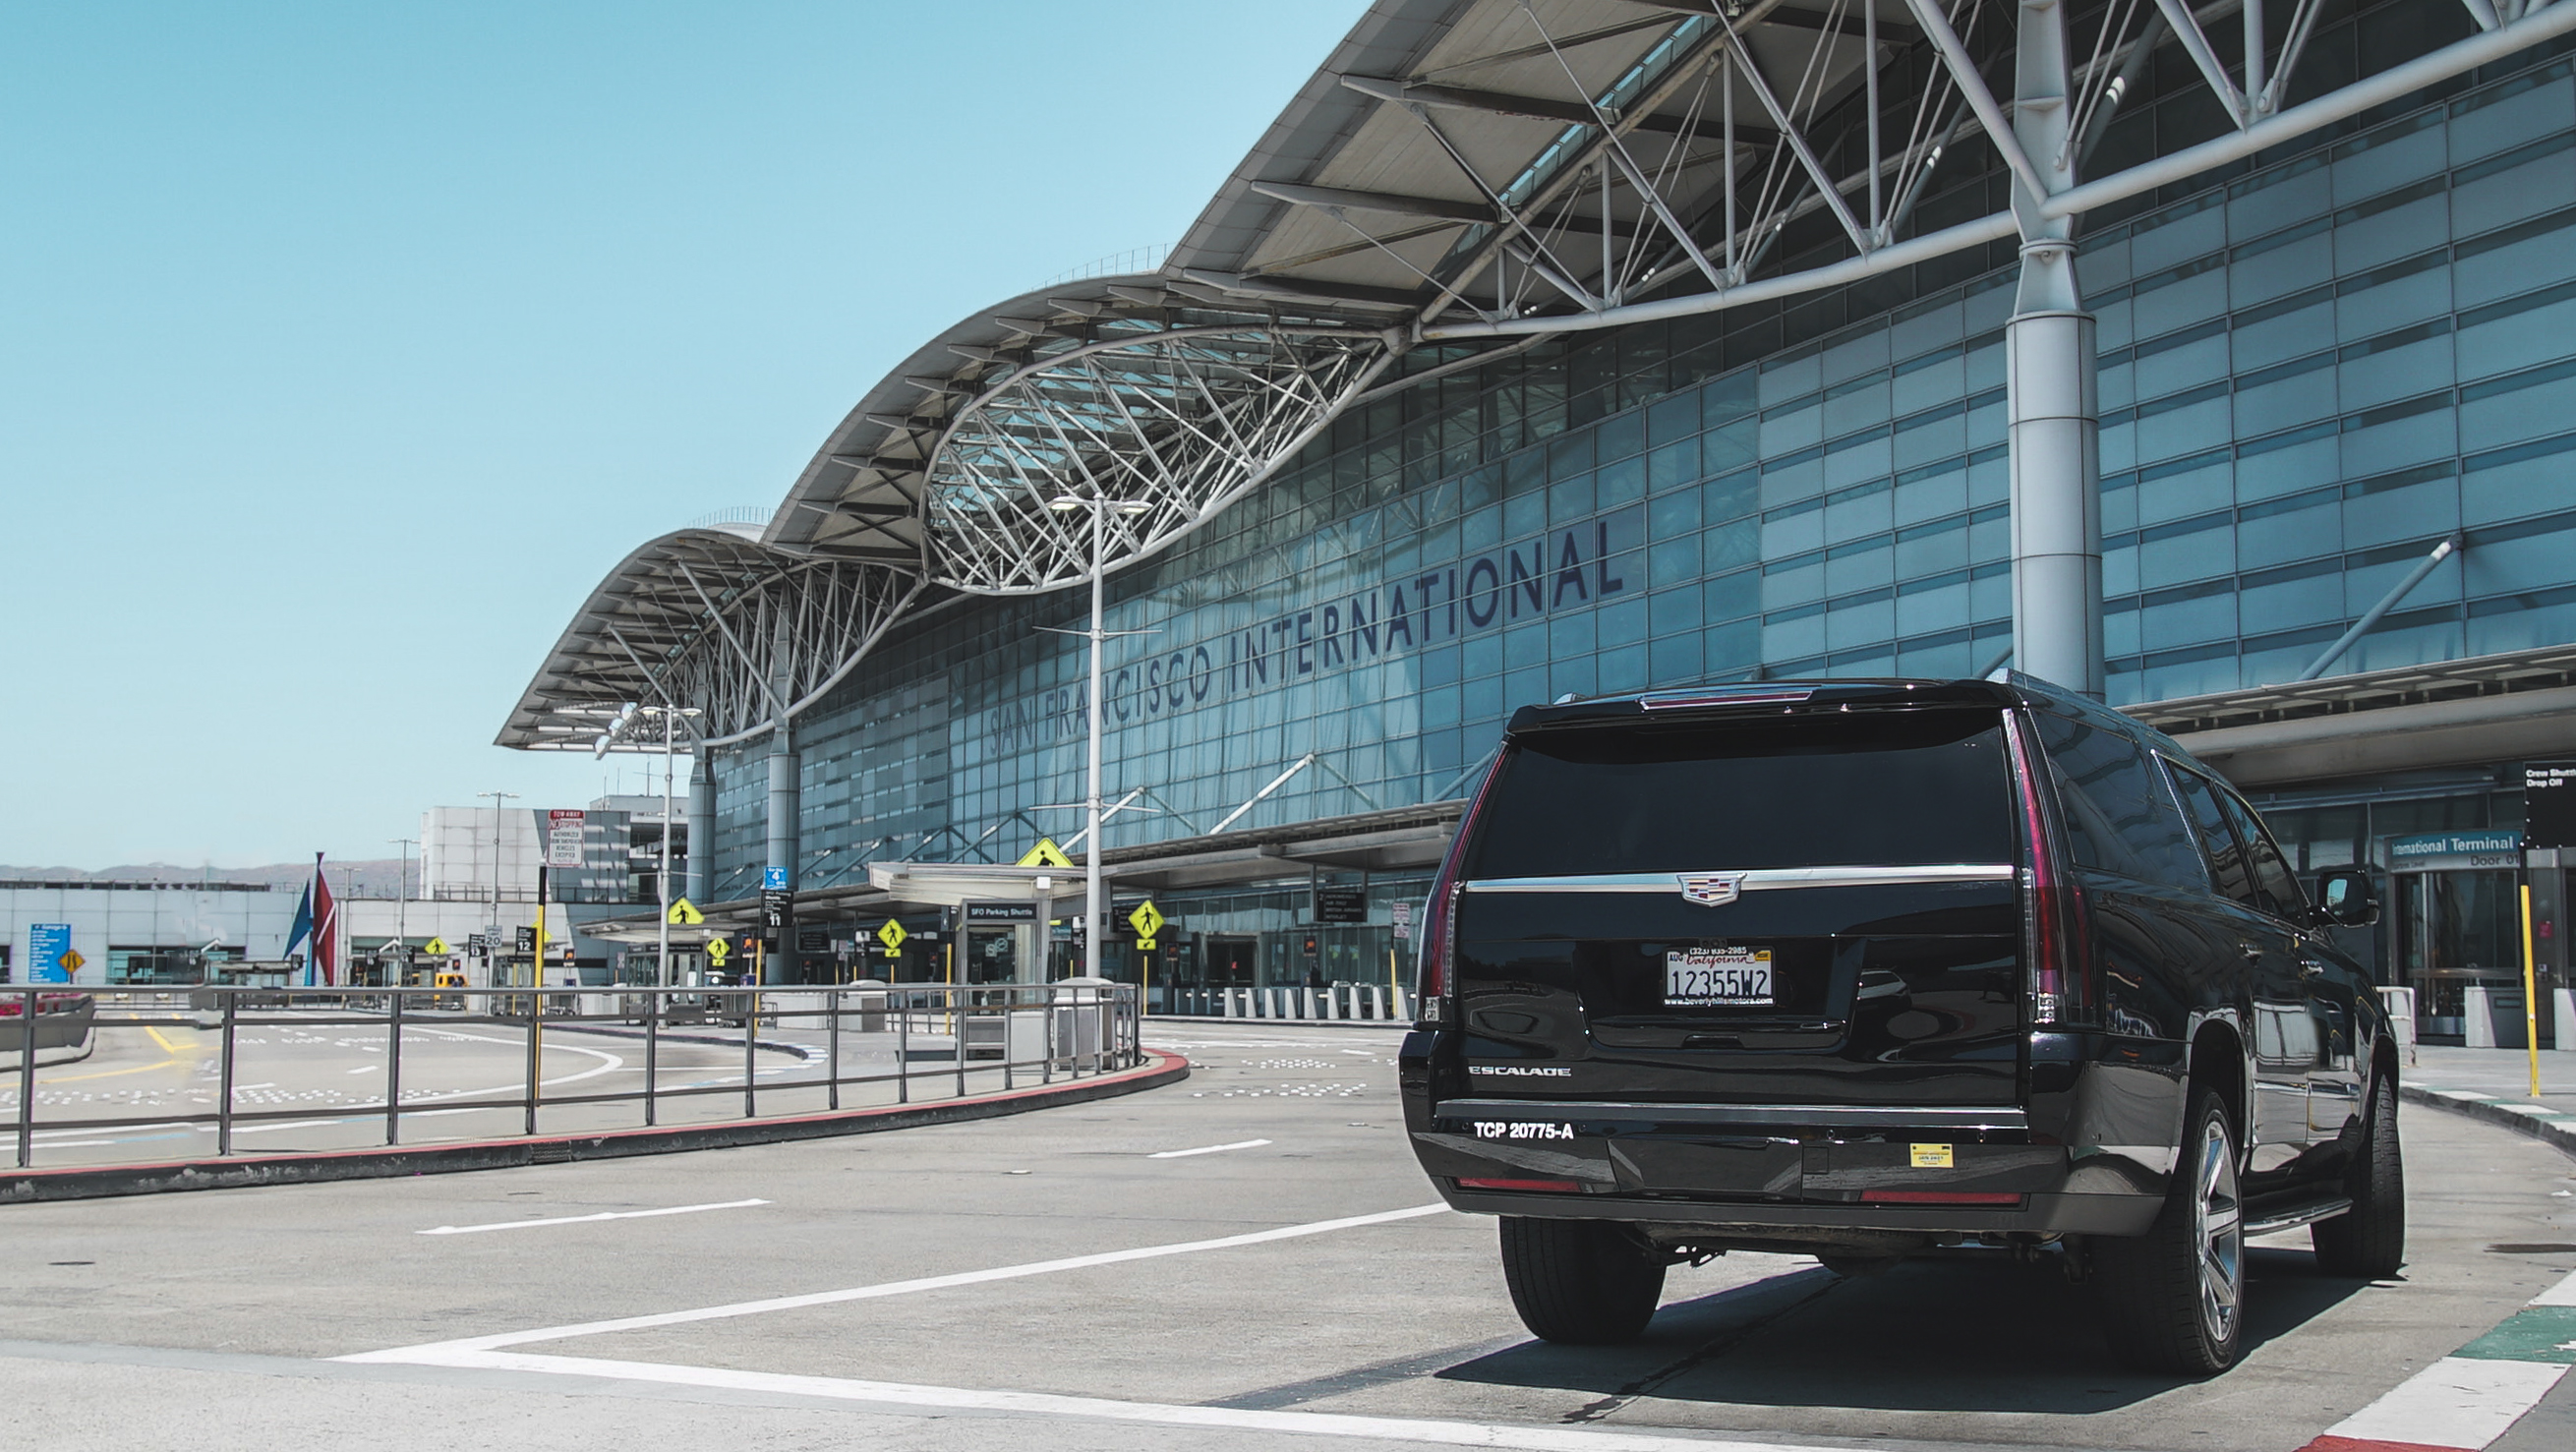 Black luxury vehicle in front of the San Francisco International Airport